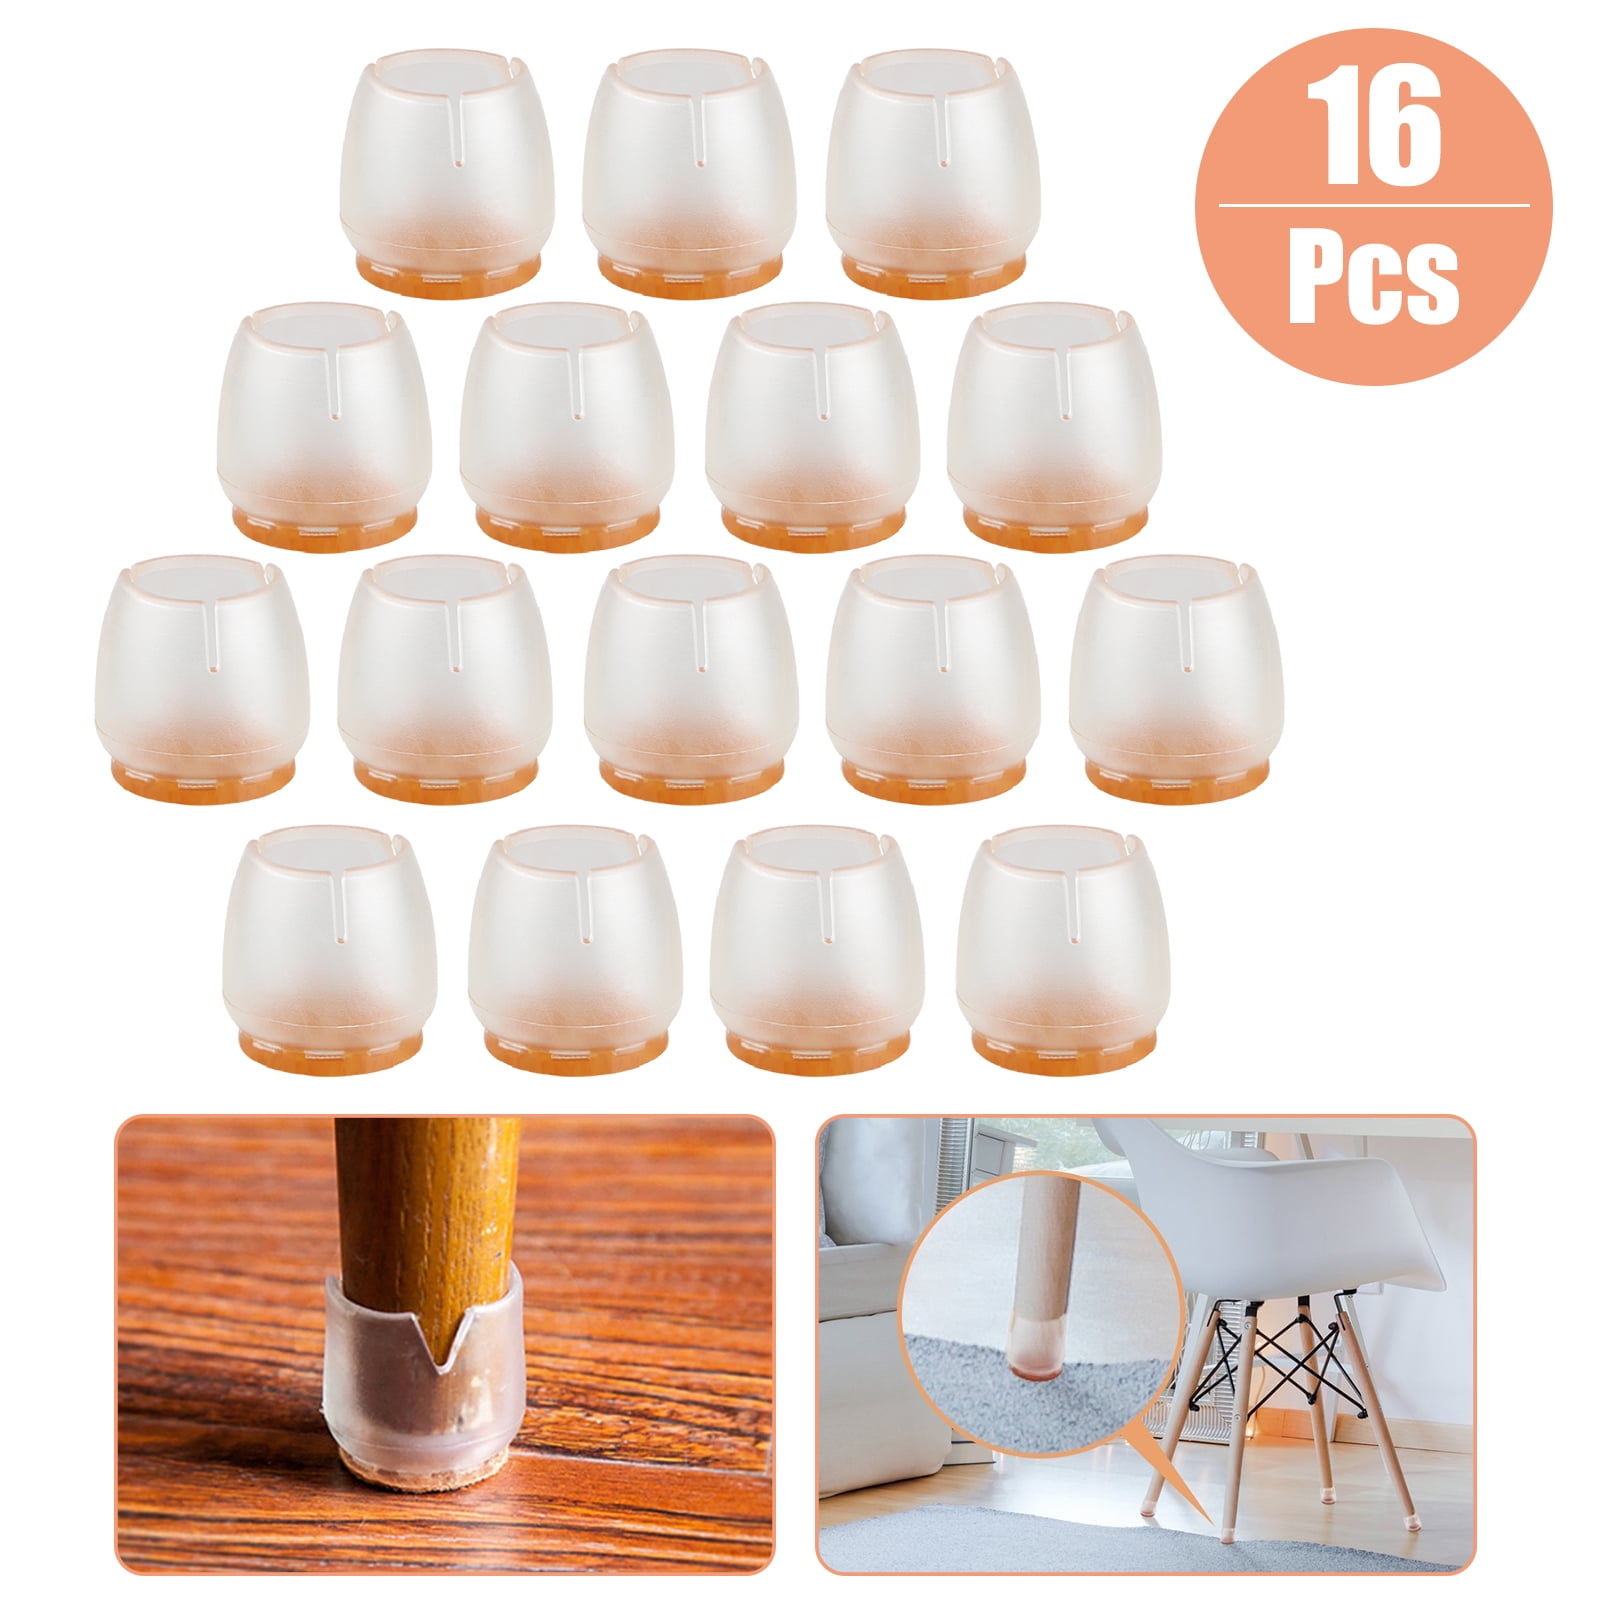 Chair Leg Cap Anti-Scratches Table Feet Protector Cover 1 1/4" to 1 1/2" 16Pcs 